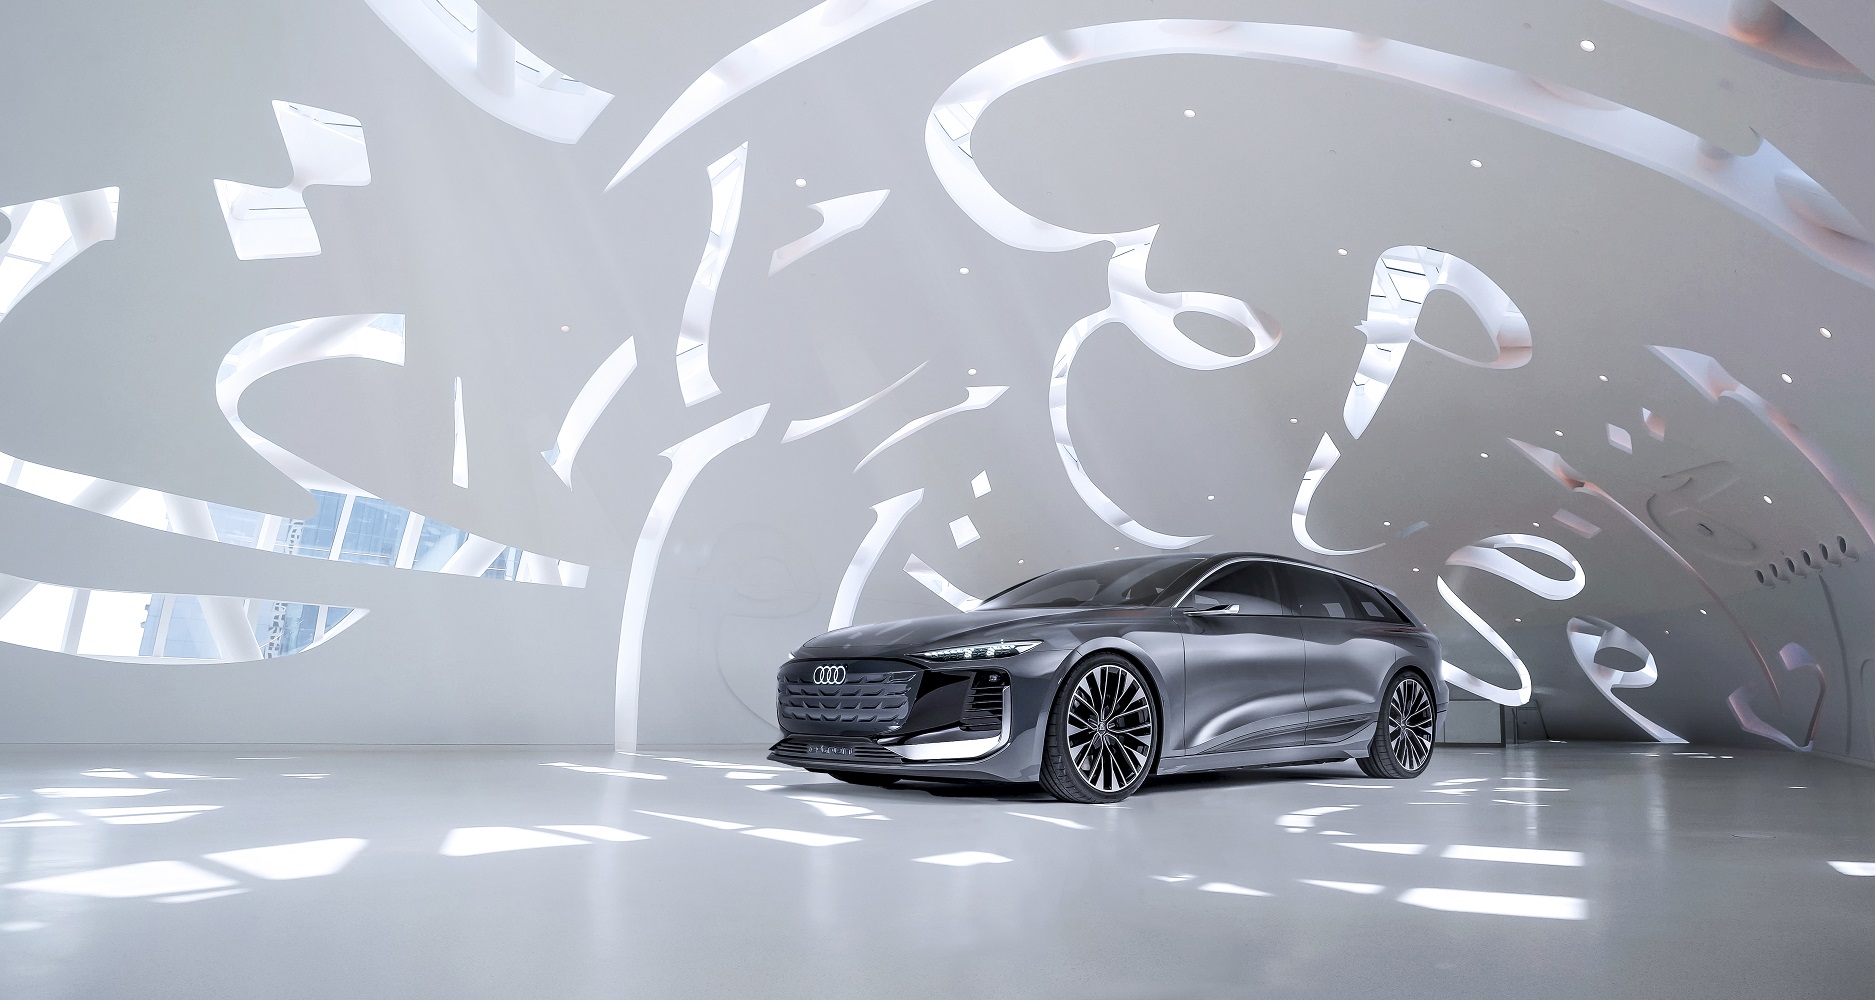 Destination Future: A Journey to Tomorrow with Audi